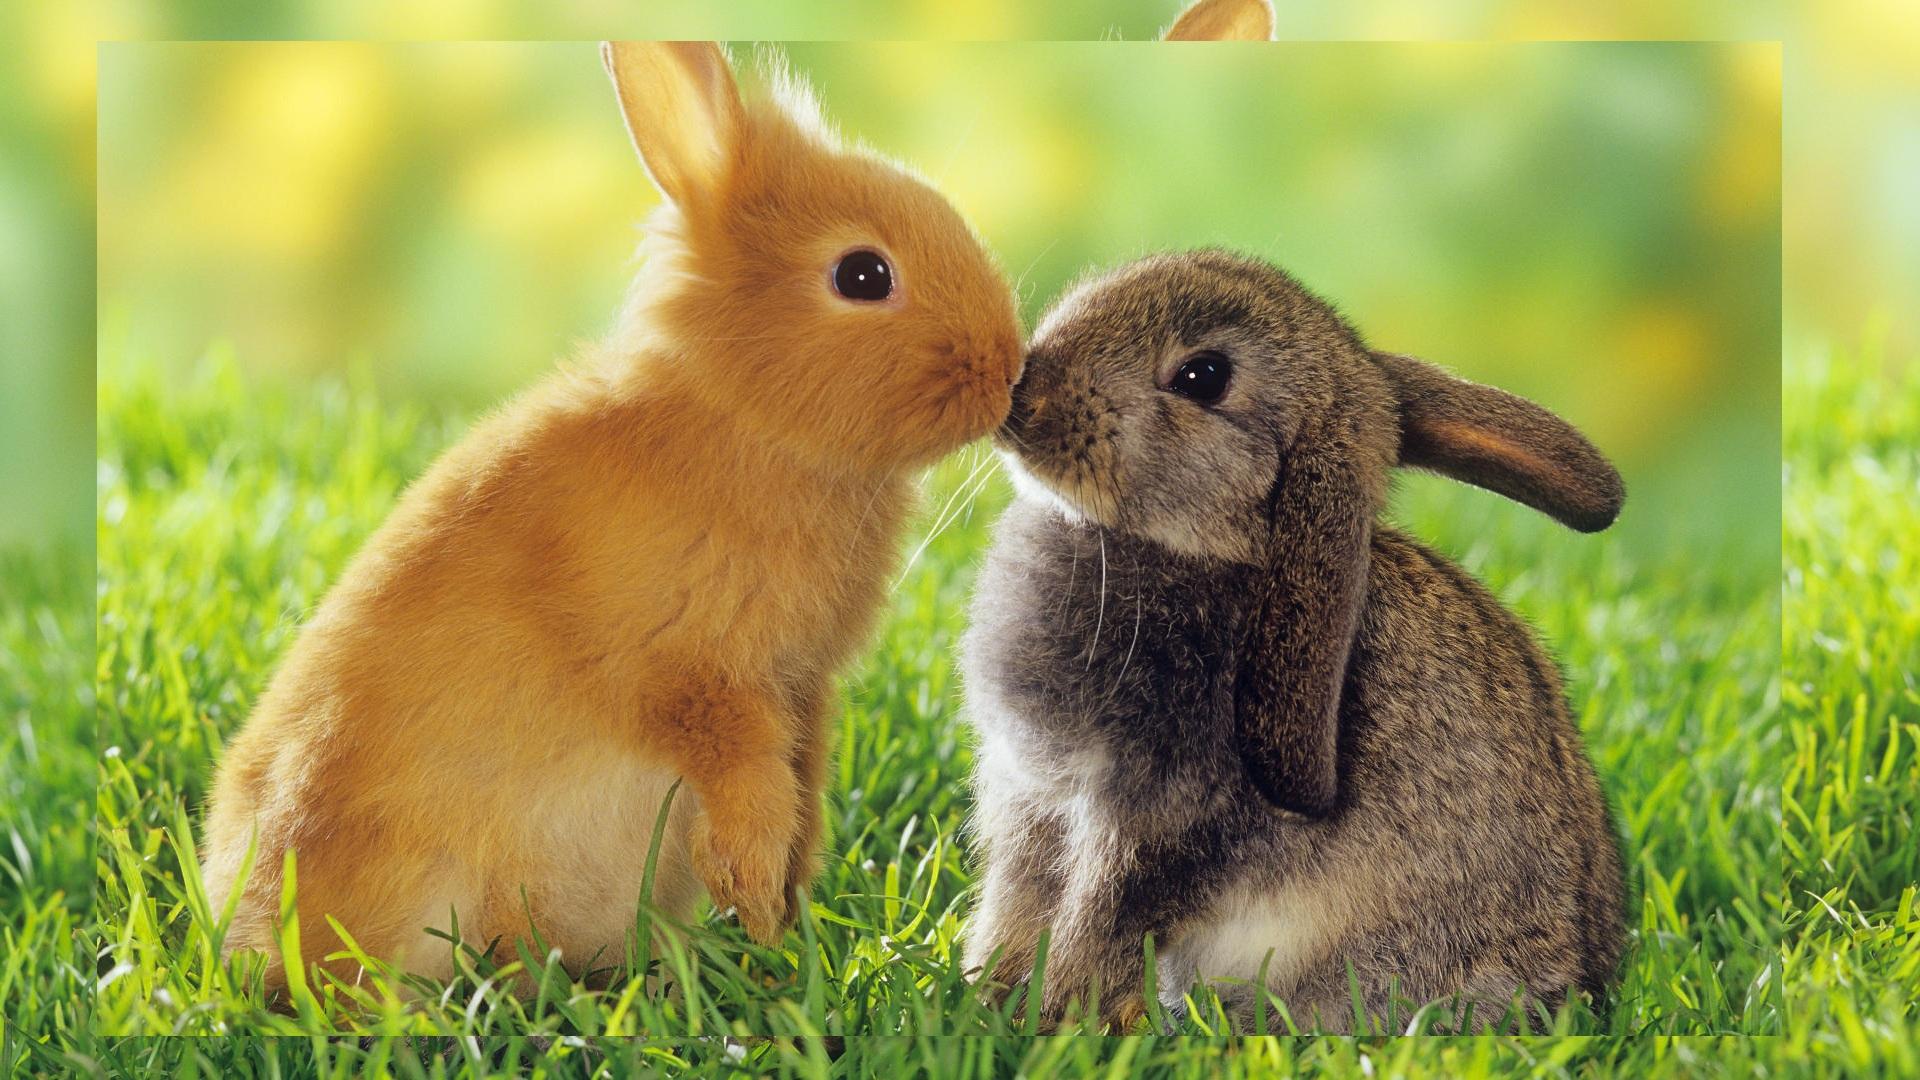 Animals In Love Wallpapers - Wallpaper Cave